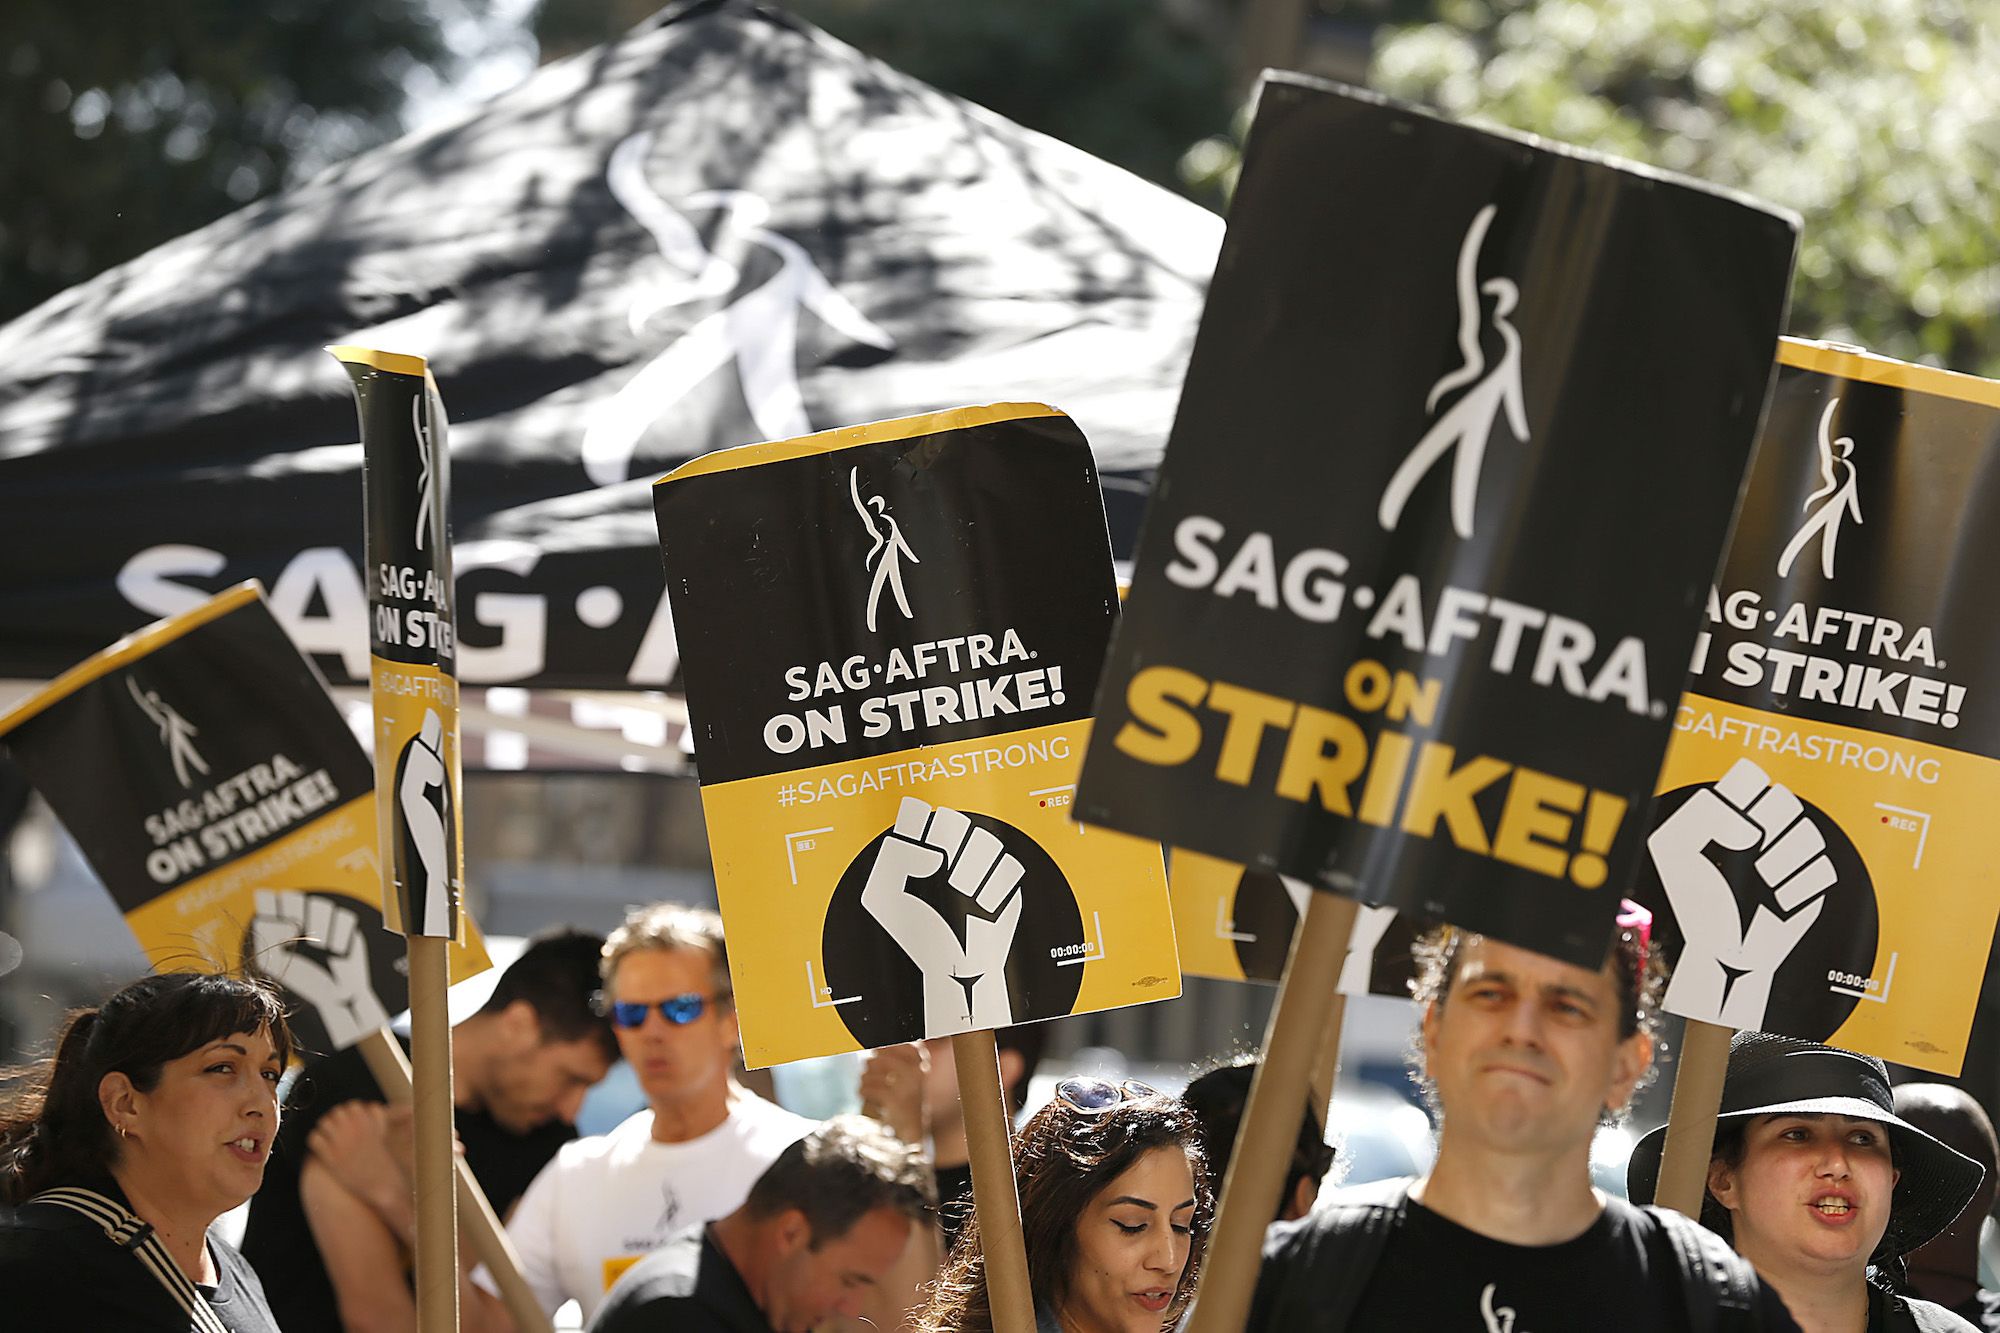 What SAG-AFTRA Strikes Mean for the Entertainment Industry